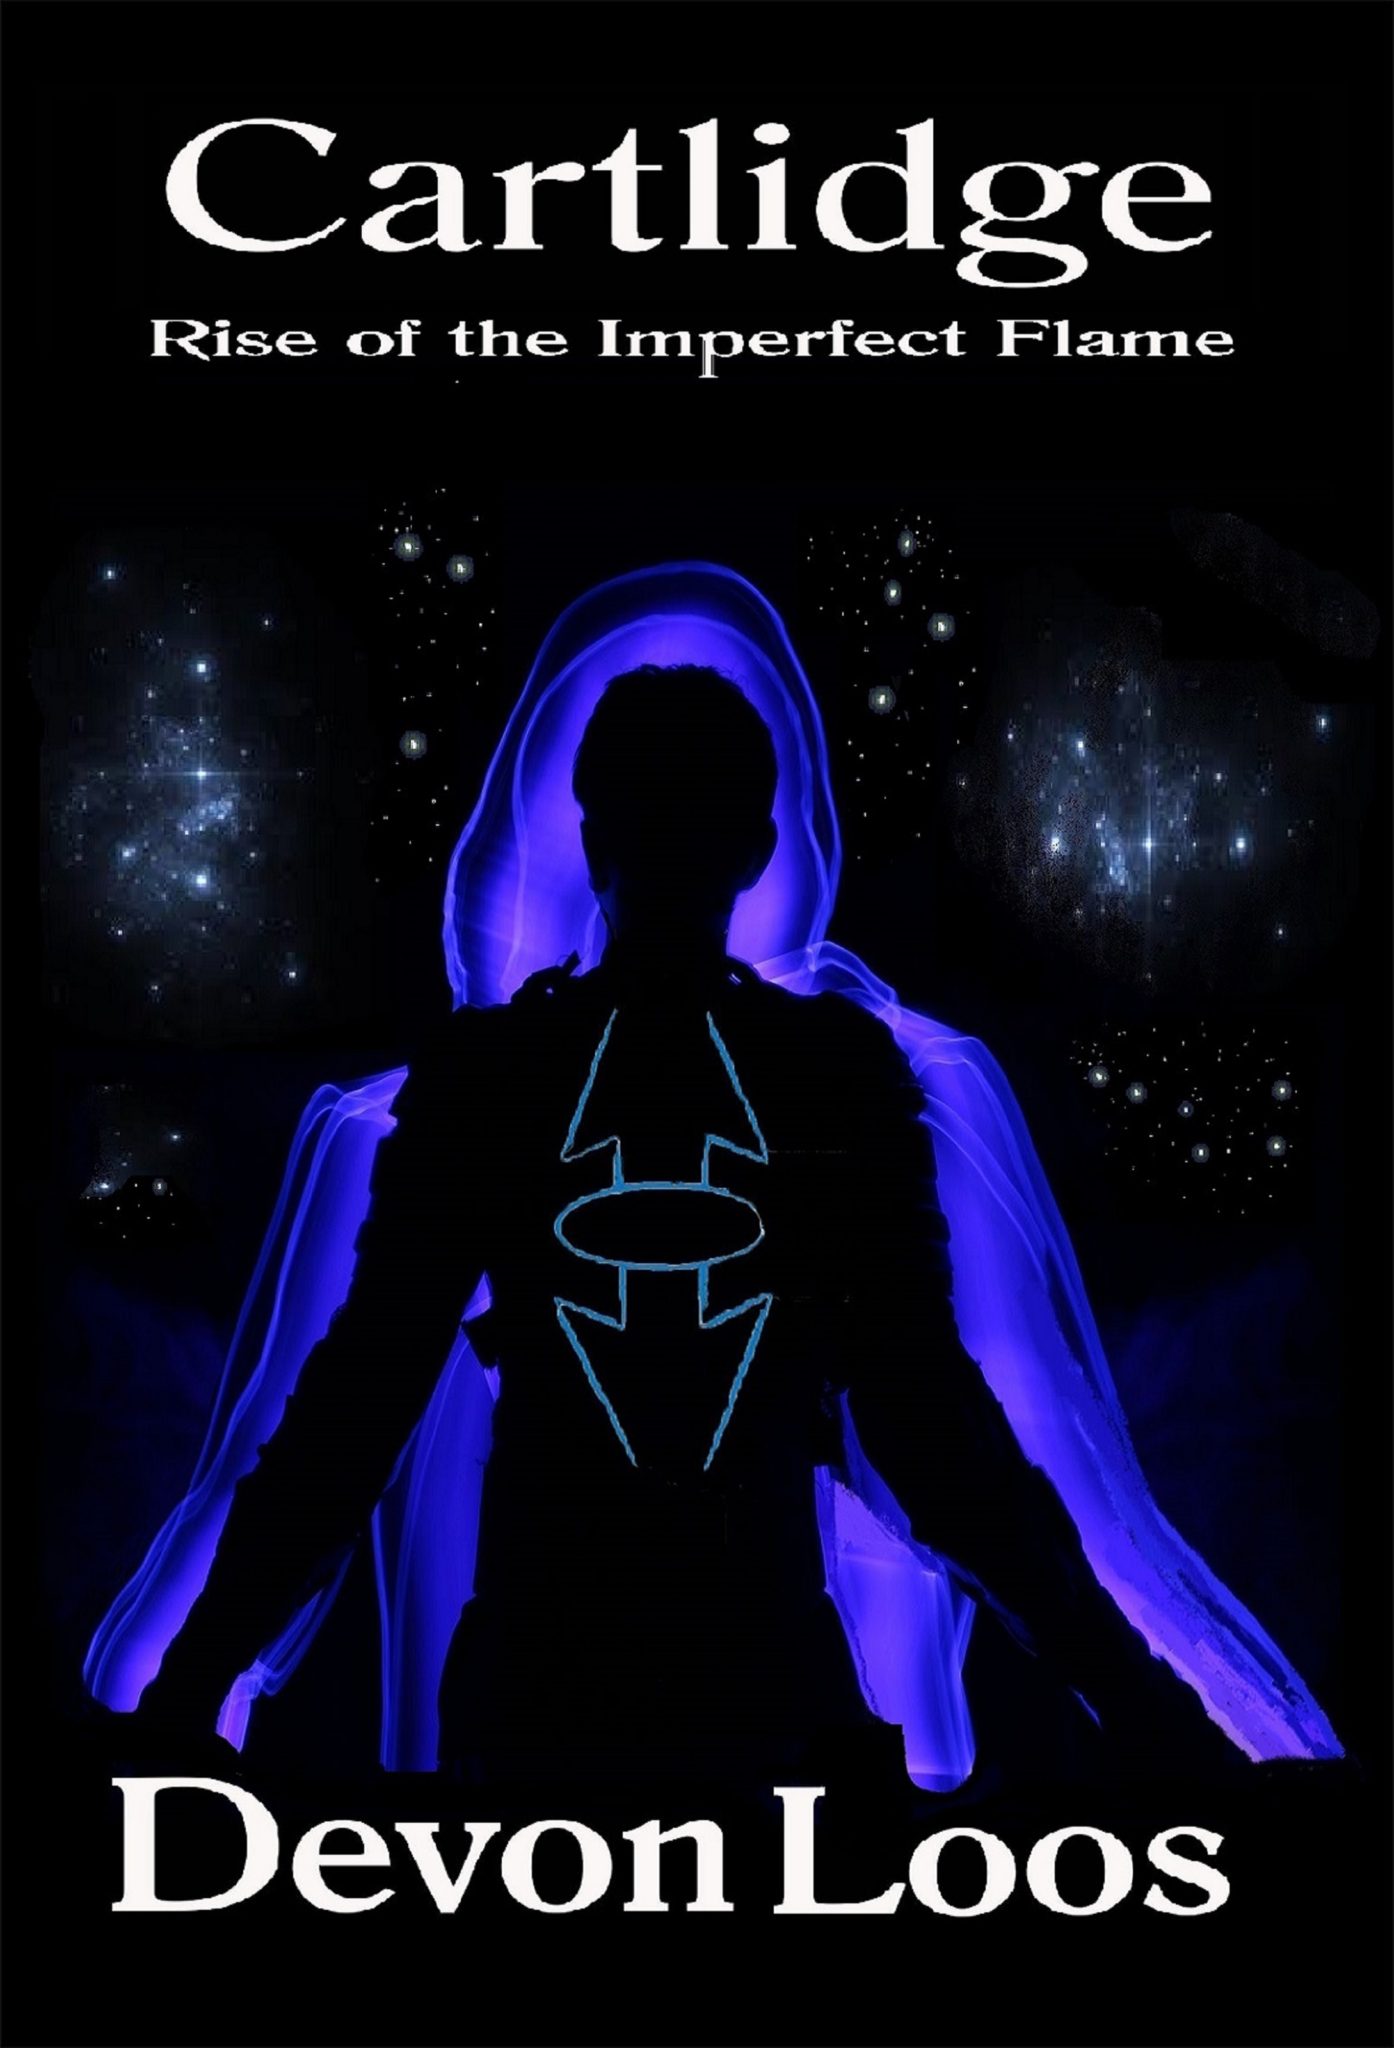 FREE: Cartlidge – Rise of the Imperfect Flame by Devon Loos